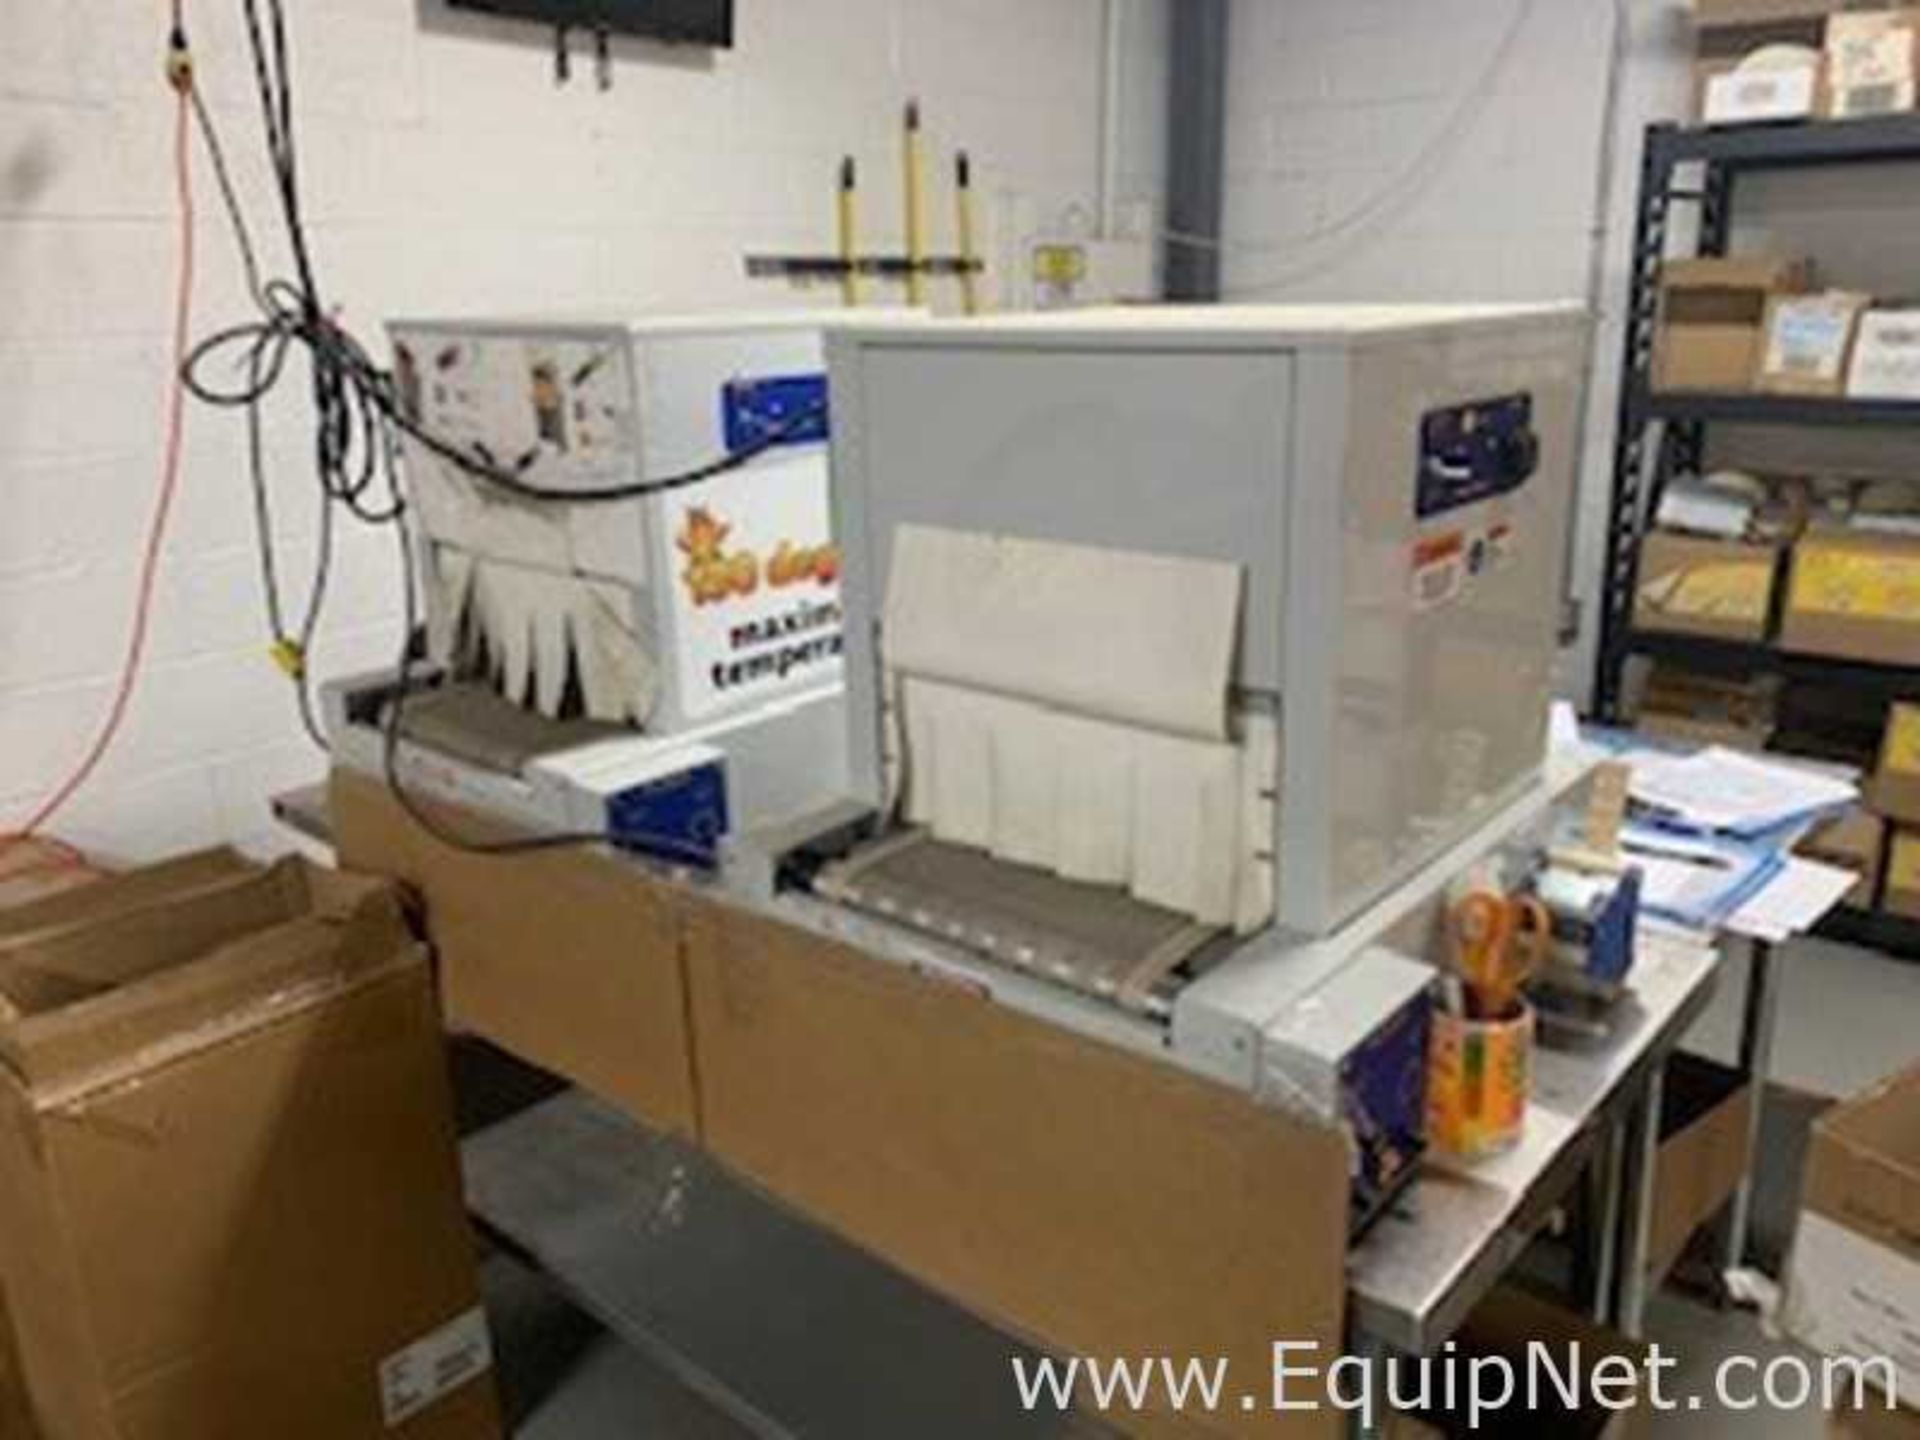 EQUIPNET LISTING #834368; REMOVAL COST: $0; MODEL: 820MB; DESCRIPTION: Lot Of Two Clamco 820 MB Heat